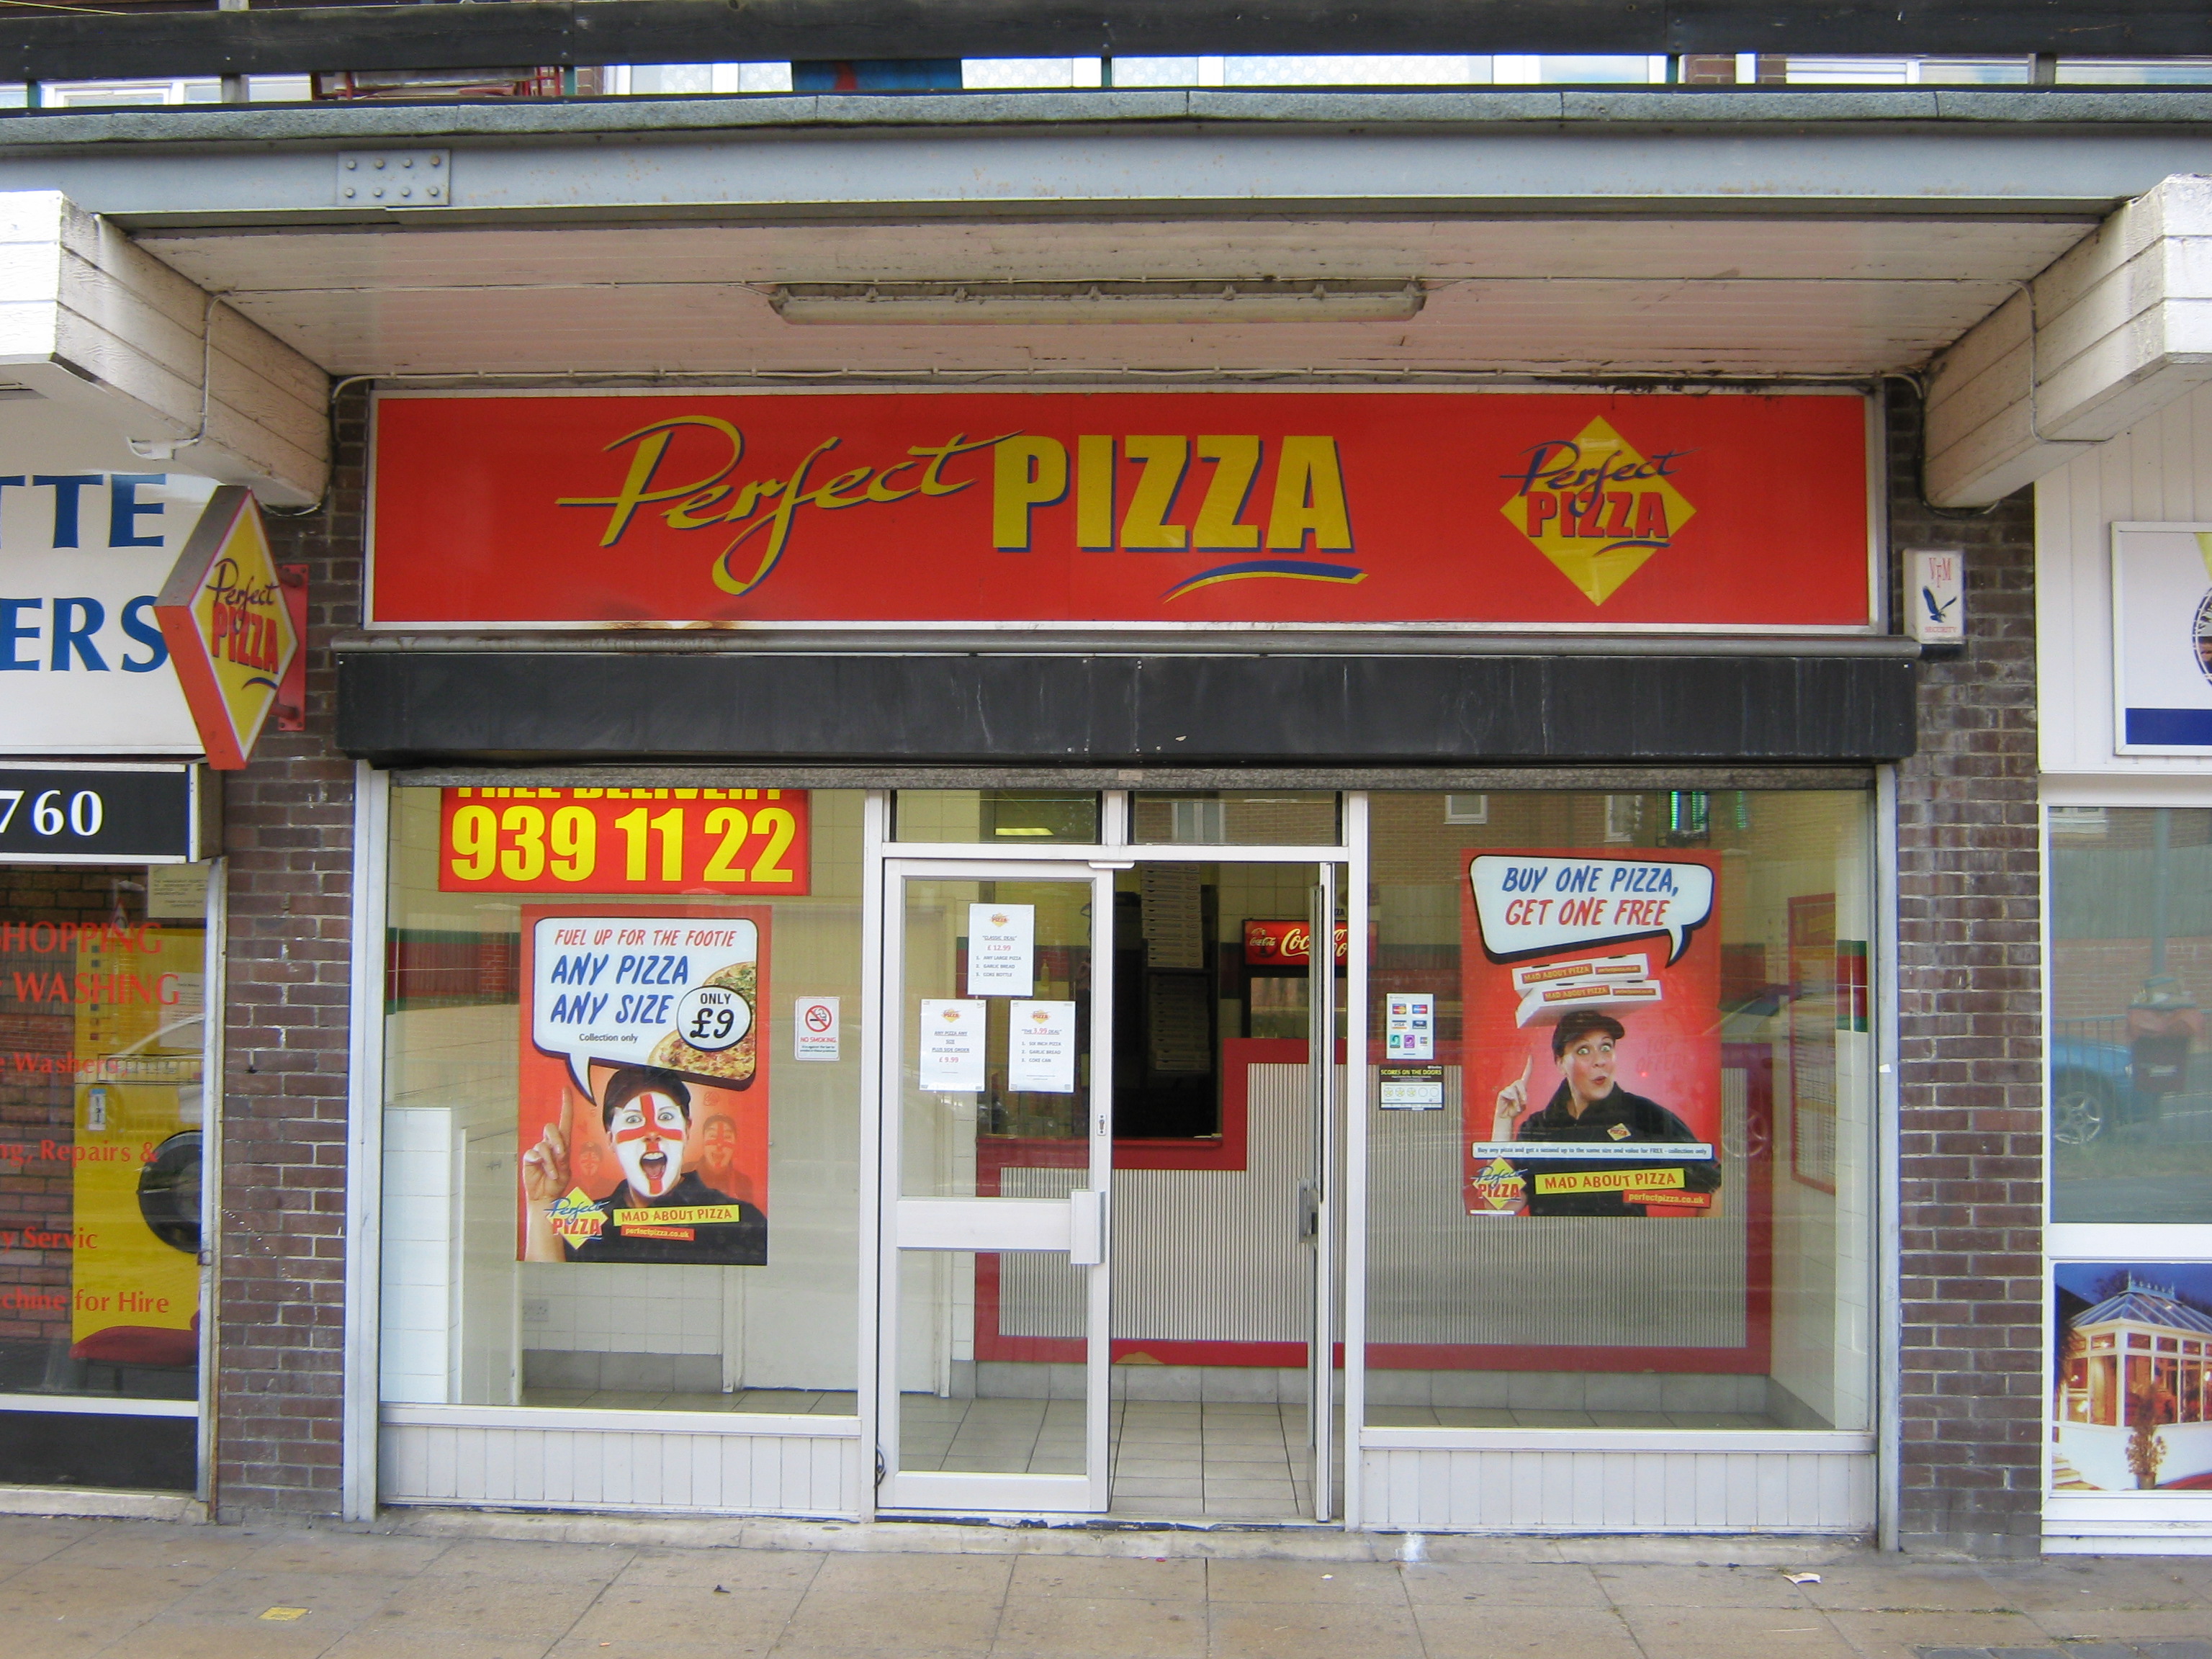 Perfect Pizza Reading Takeaway opening times and reviews